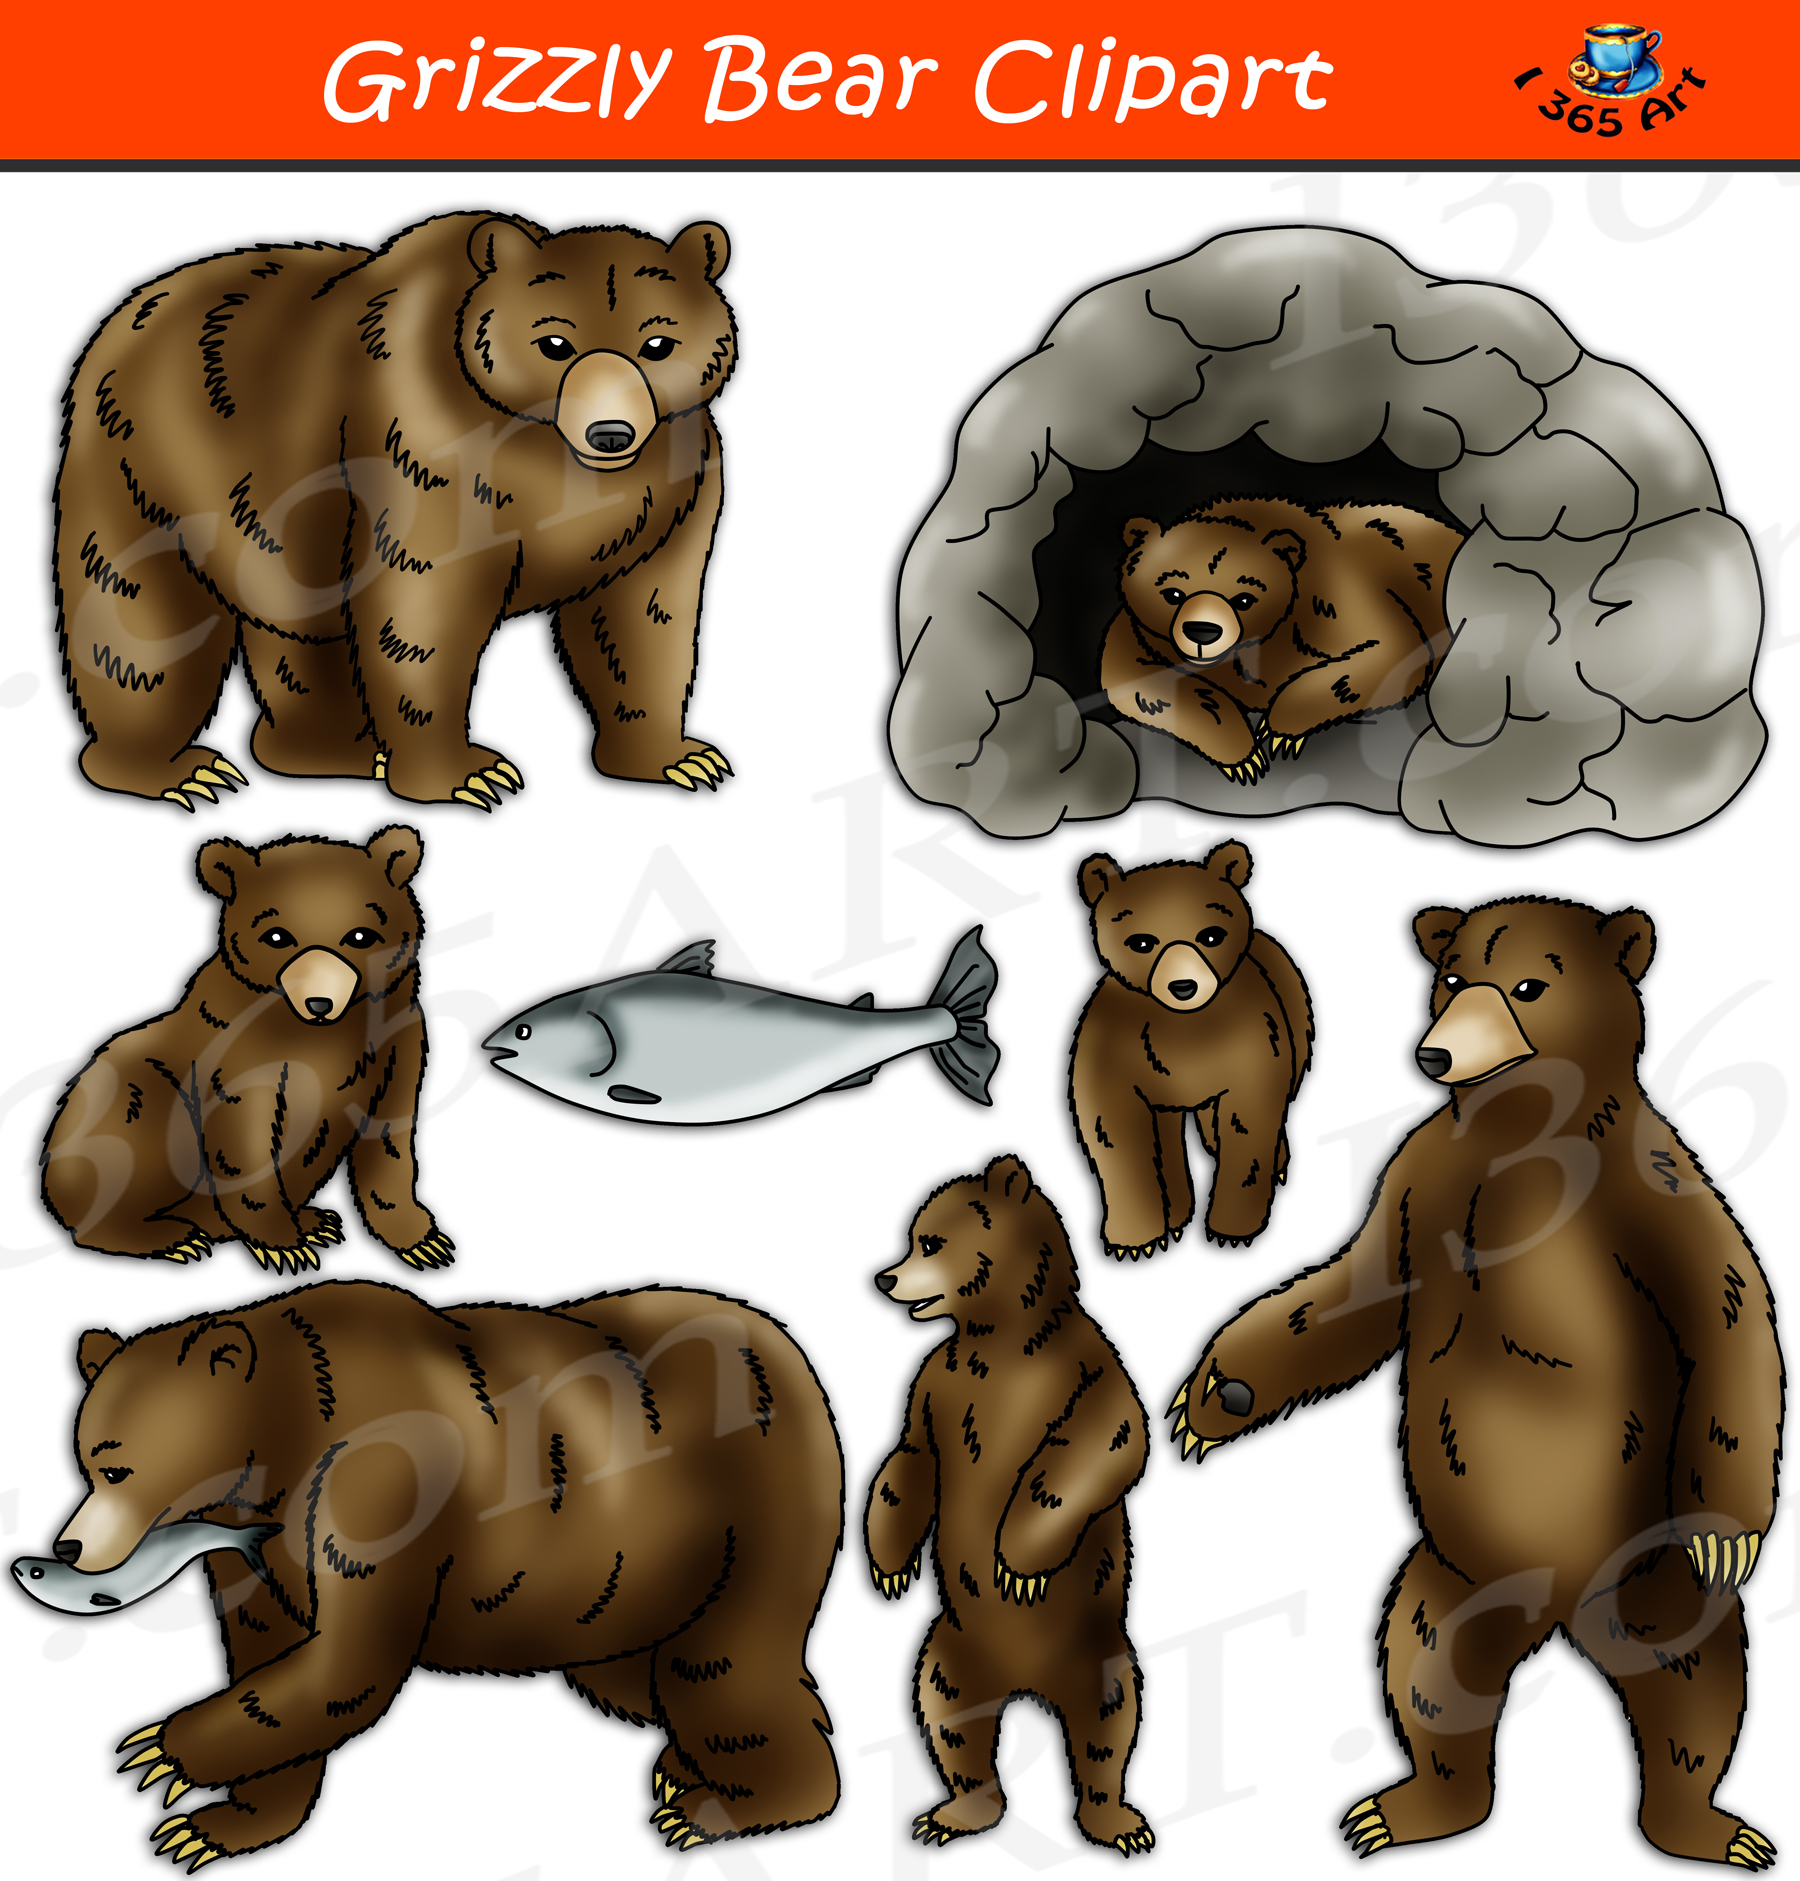 Grizzly Bear Clipart Graphics Download.